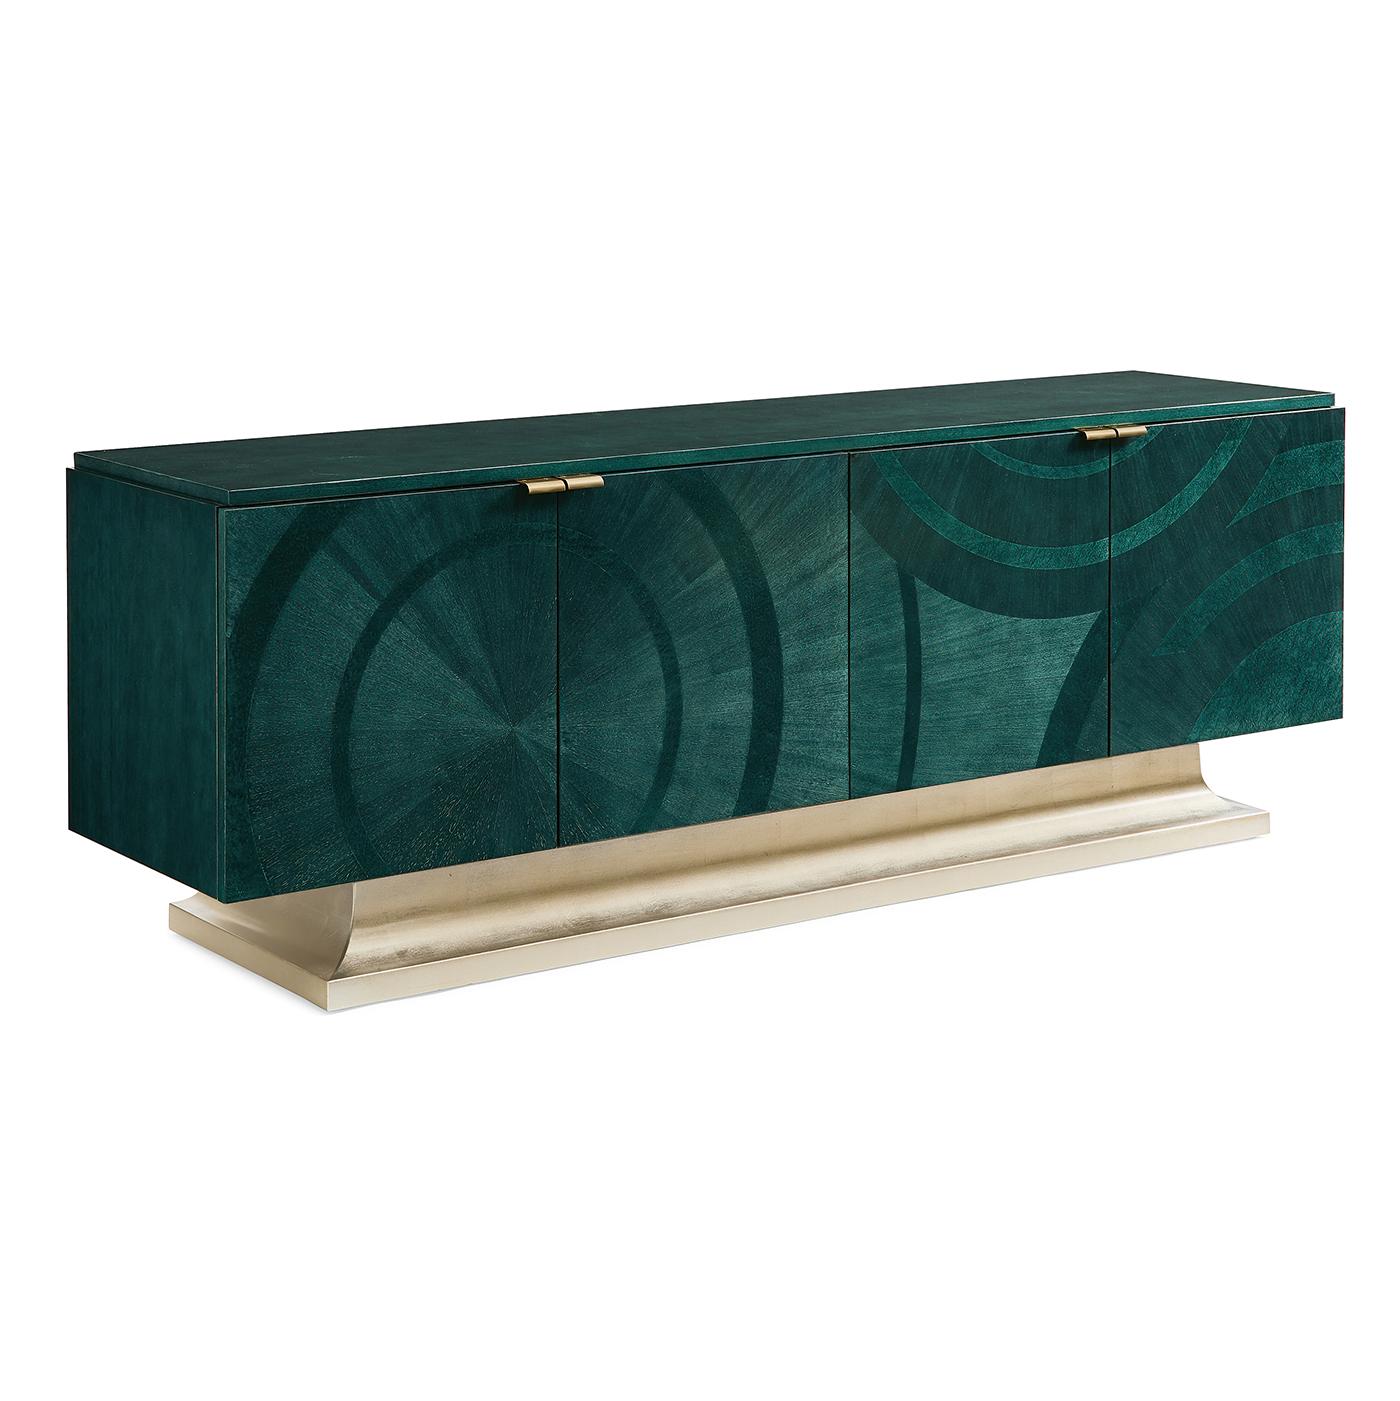 This glamorous Art Deco cabinet is a stunning statement-maker. This impressive media cabinet console is distinguished by an Art Deco-inspired pattern brought to life in a bold shade of Emerald Peacock over Koto veneers and Bird's Eye Maple inlays. A